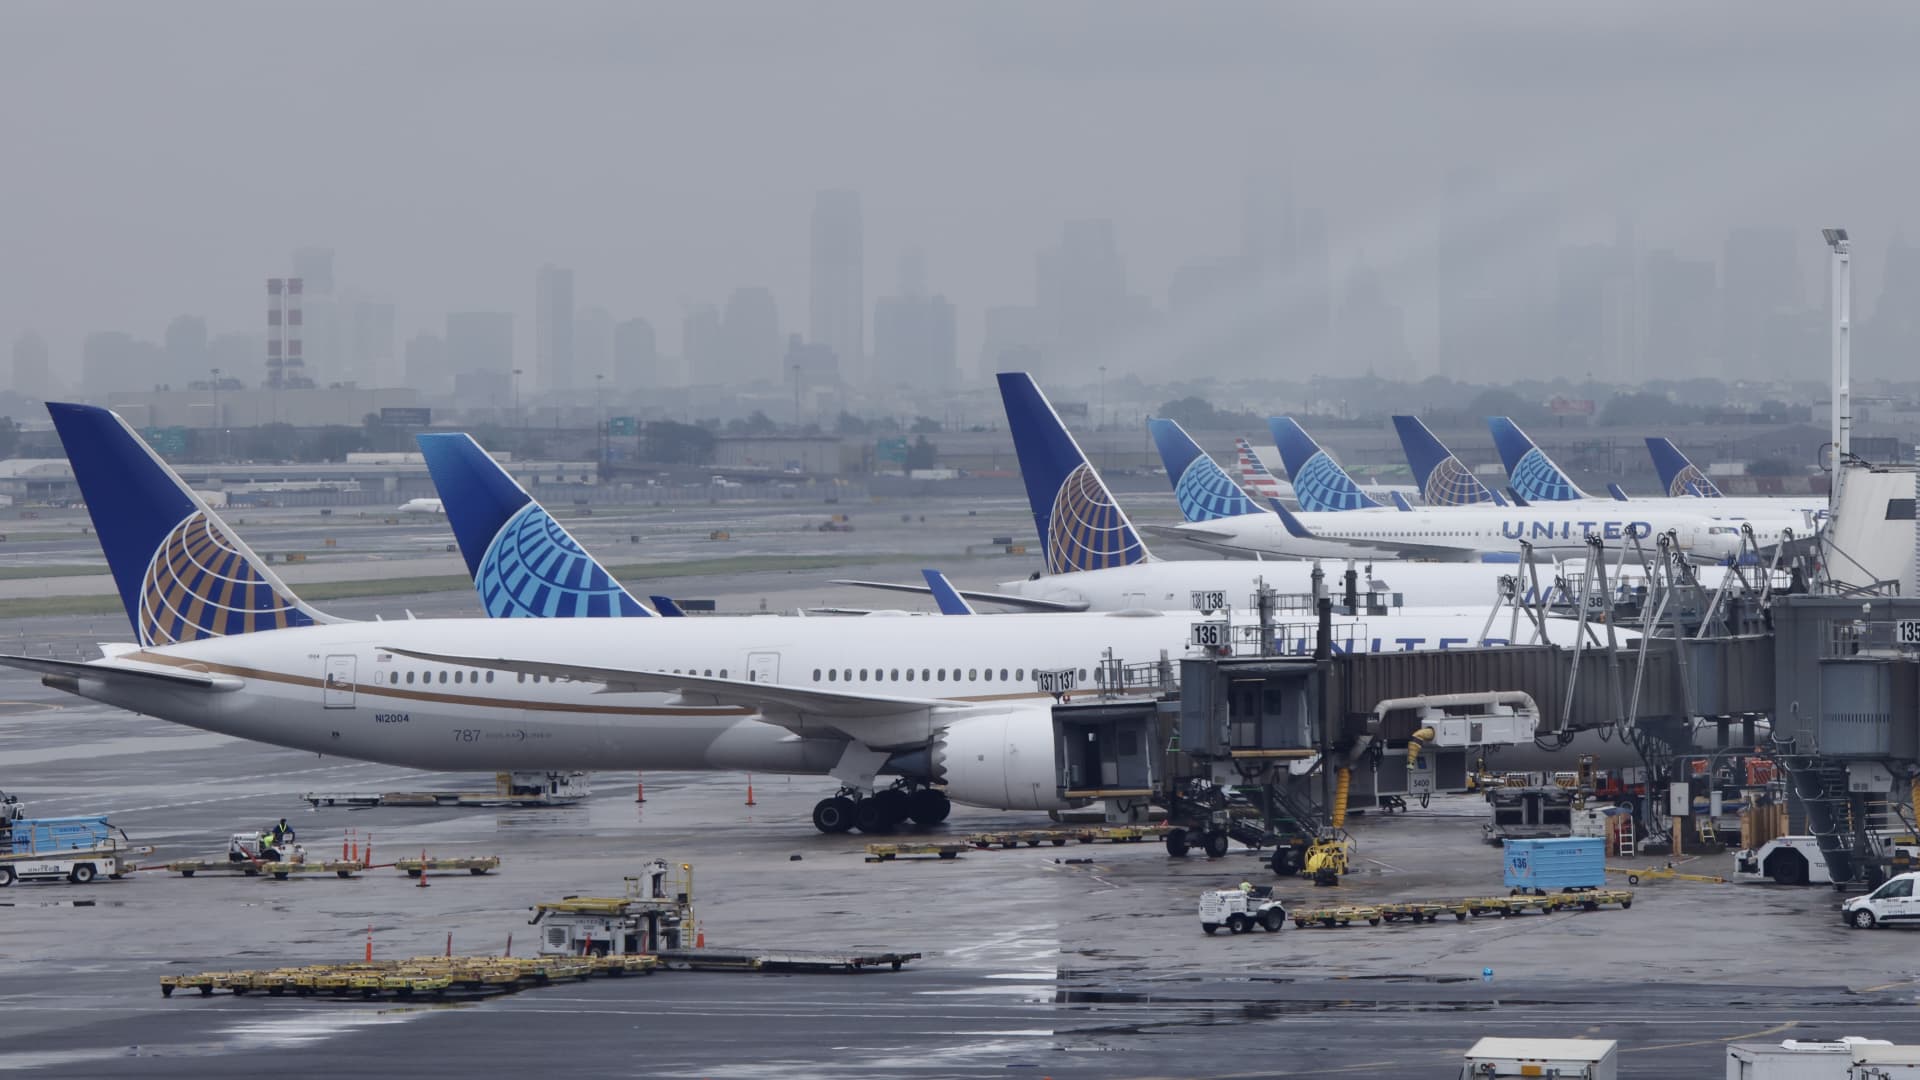 United presents 30,000 frequent flyer miles to travelers hit by flight delays, CEO states routine cuts desired